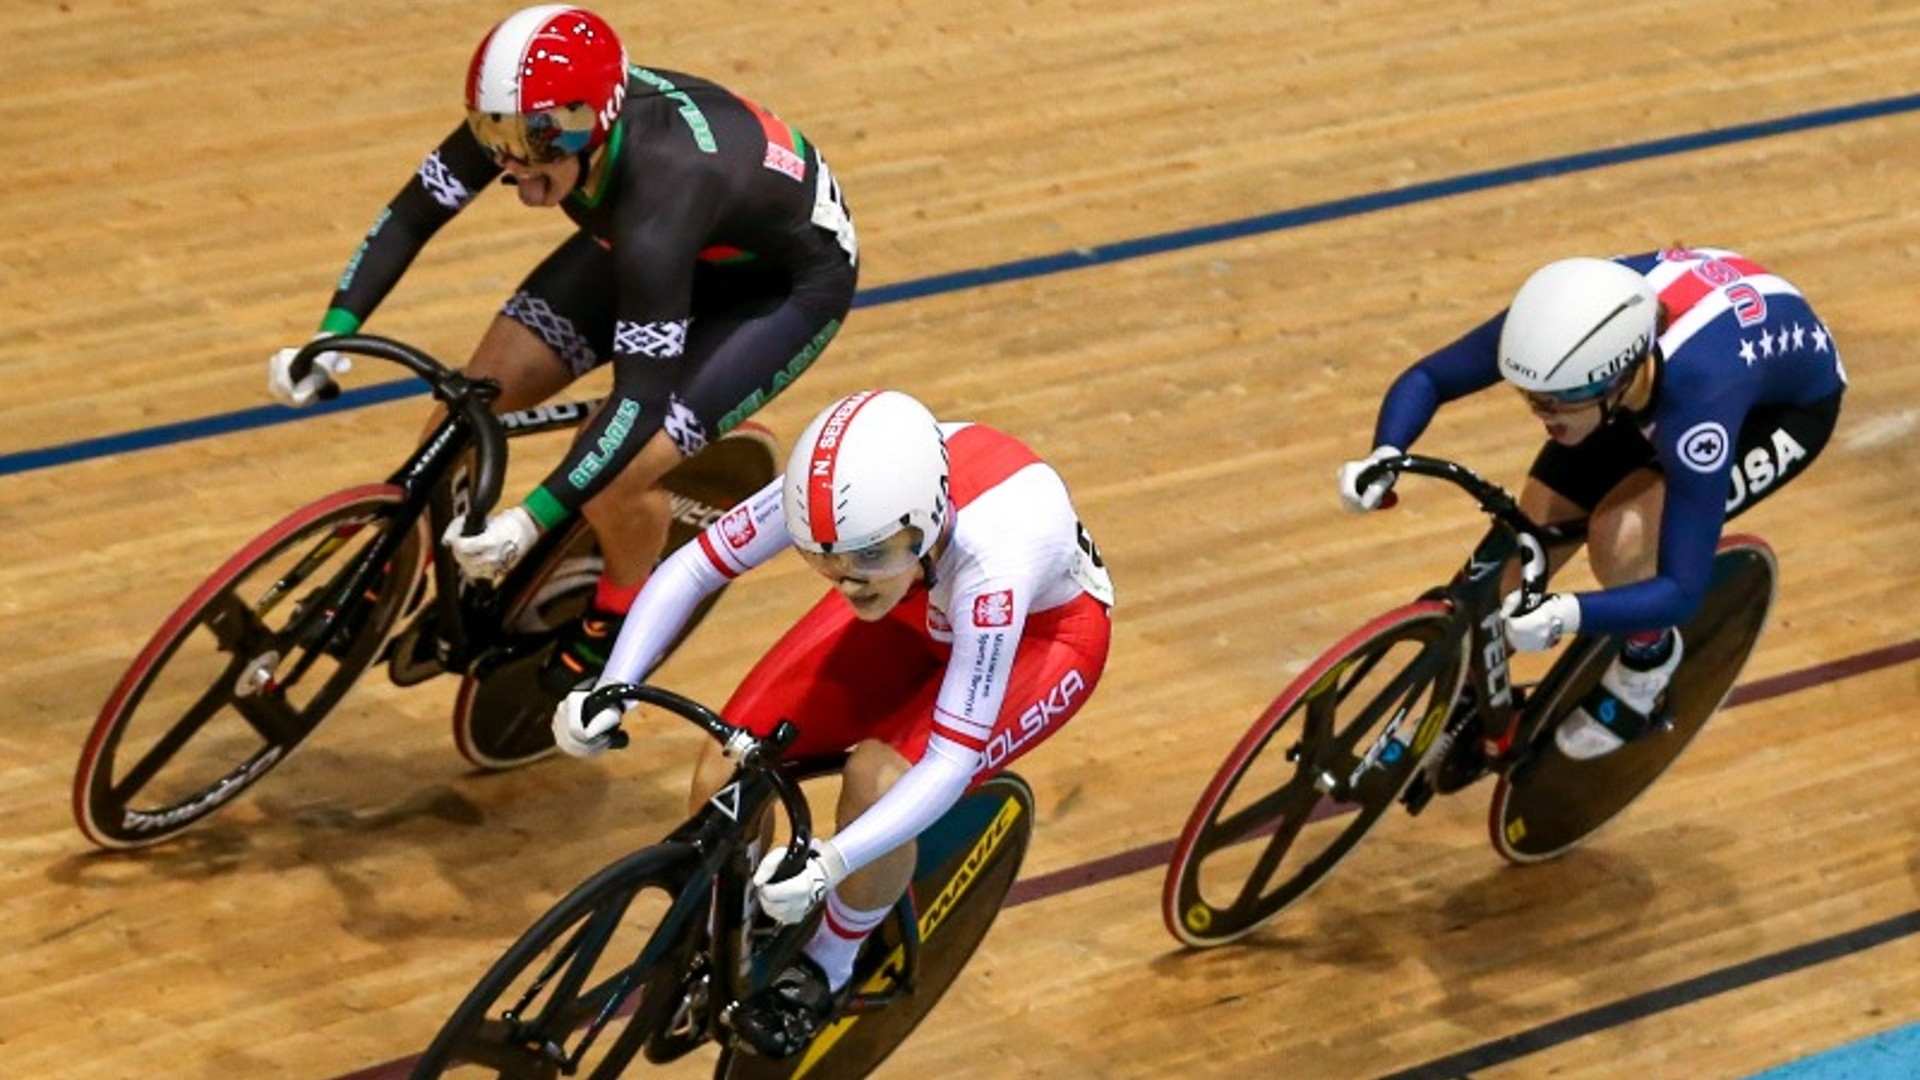 UCI Junior Track Cycling World Championships 2022 LIVE Streaming, When and Where to Watch, Schedule